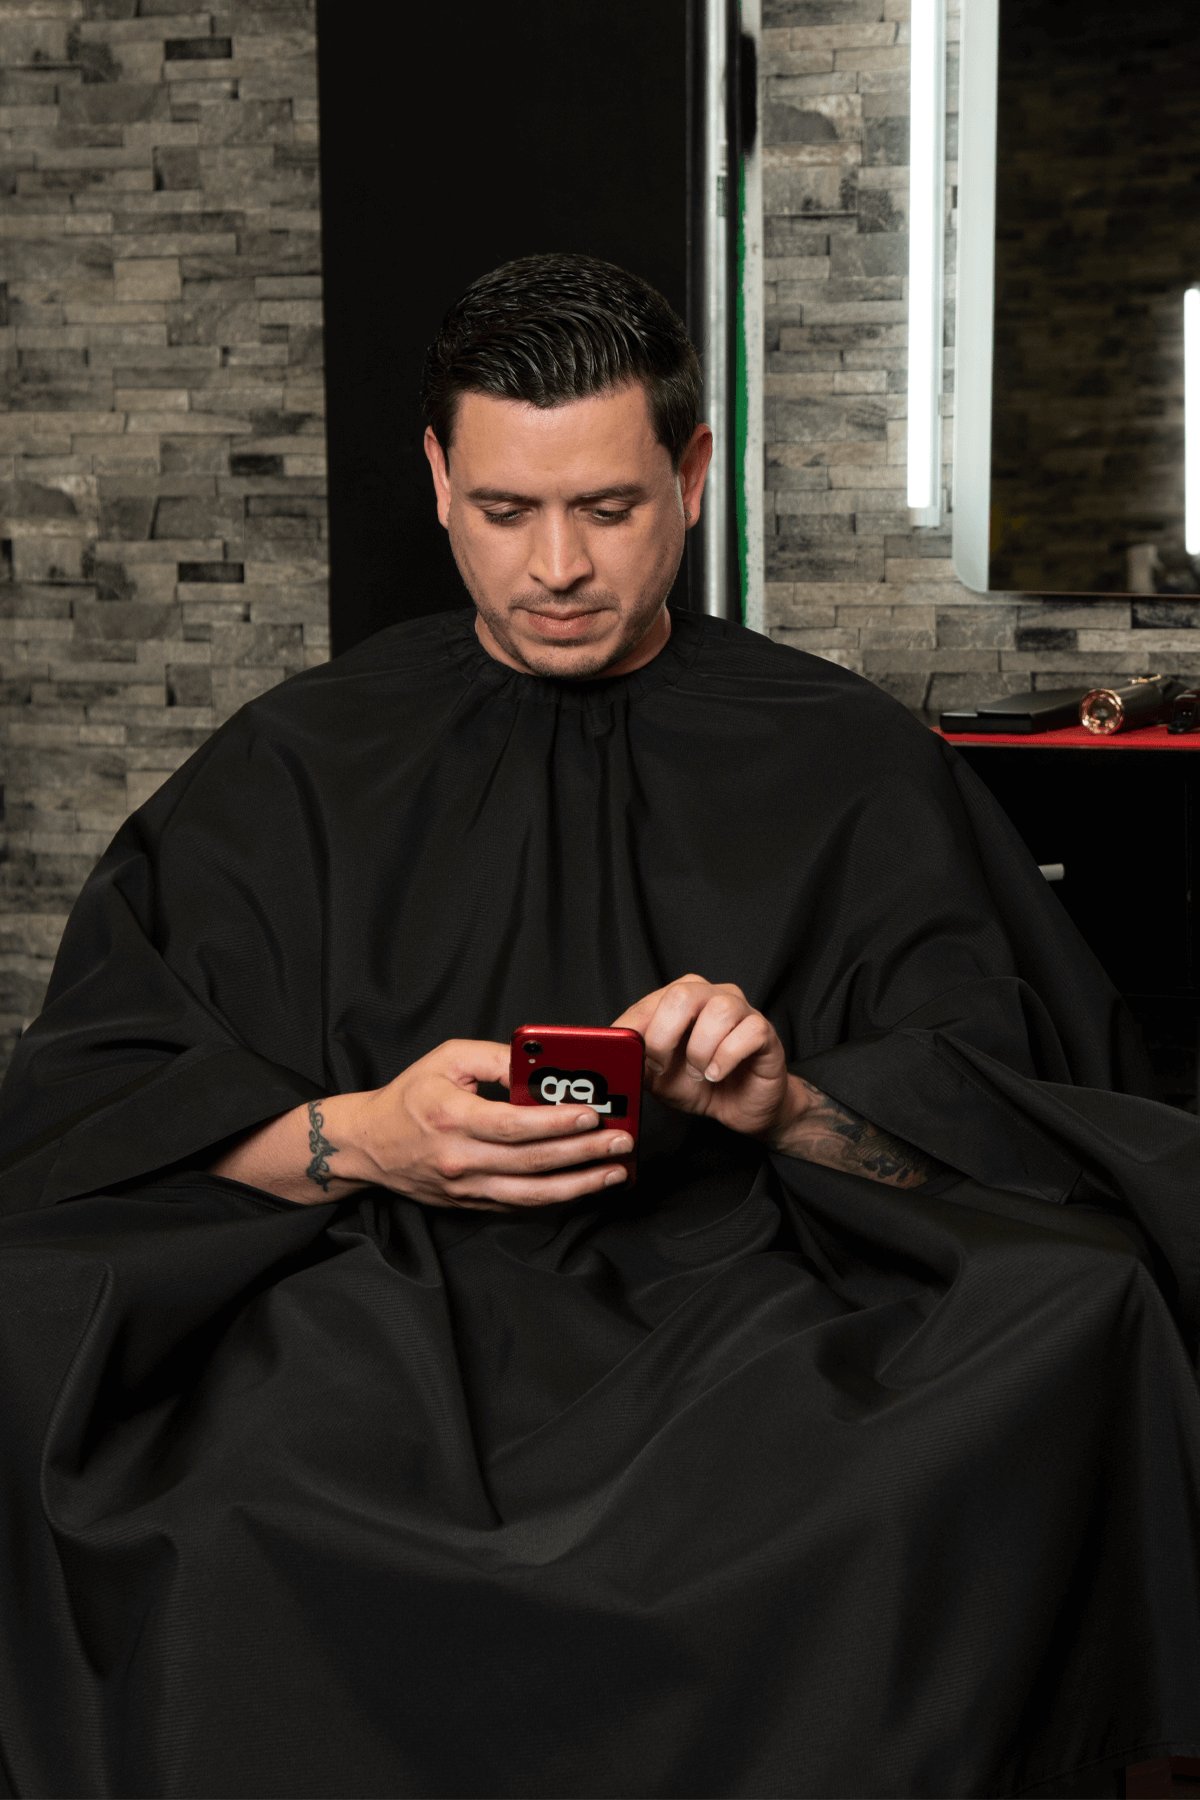 The Barber Hands Free Cape